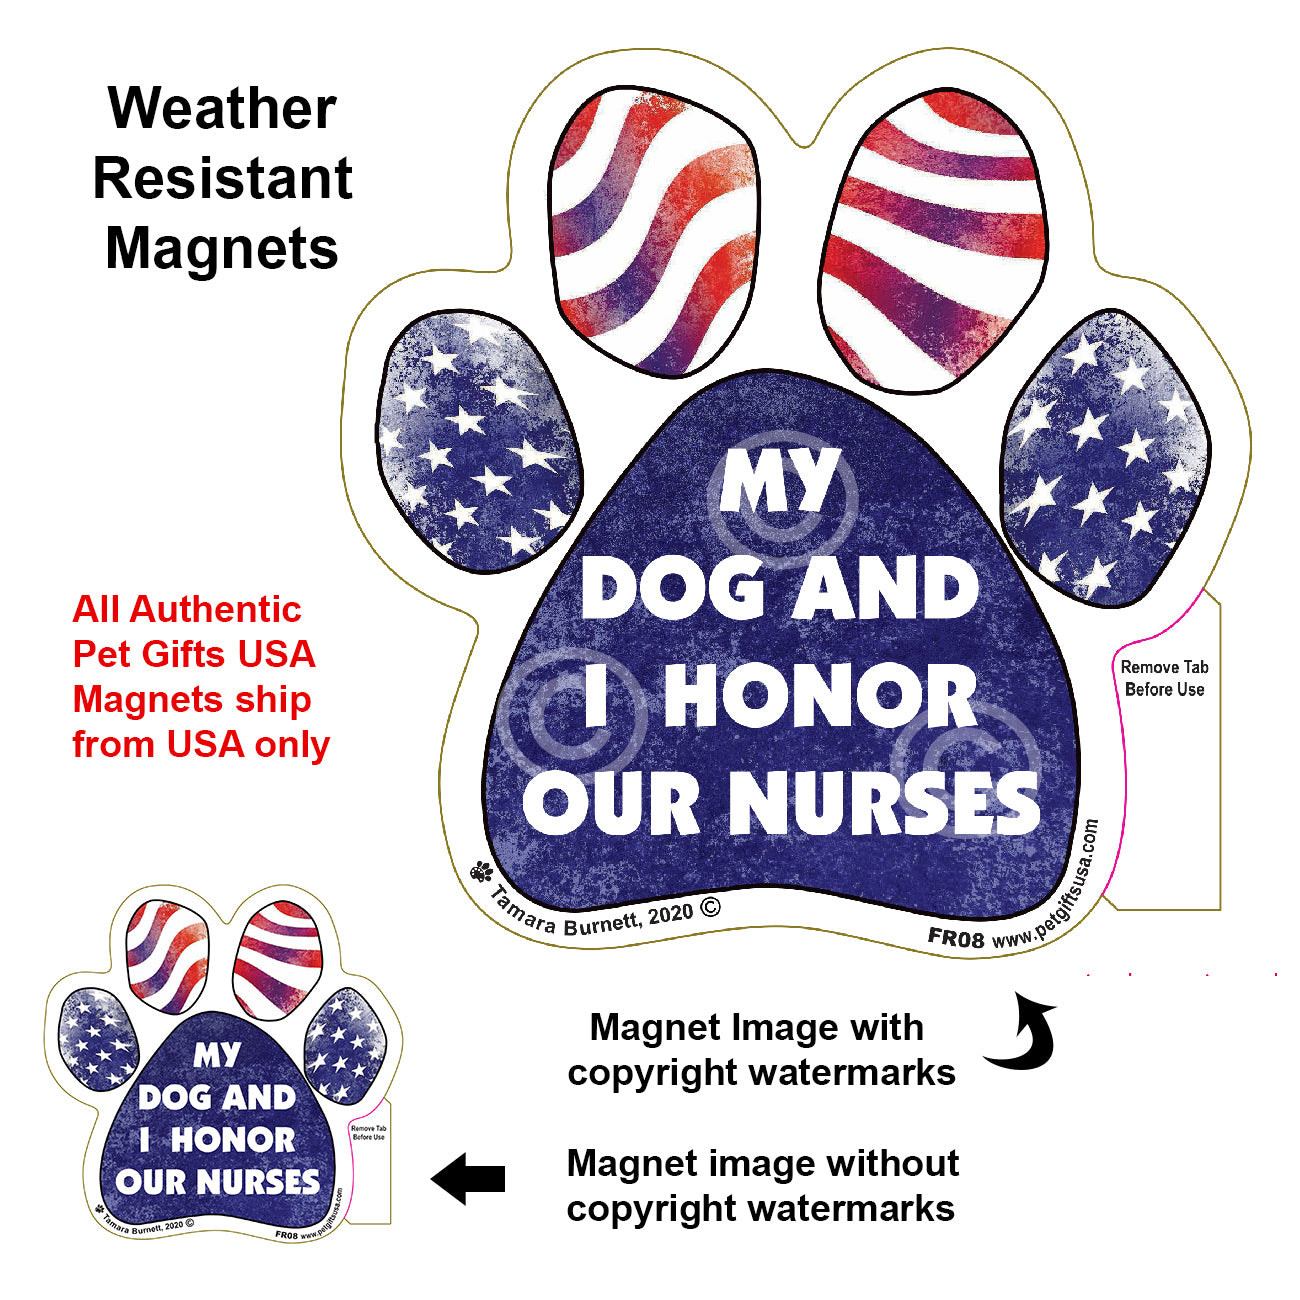 My Dog and I Honor Our Nurses Paw Magnet